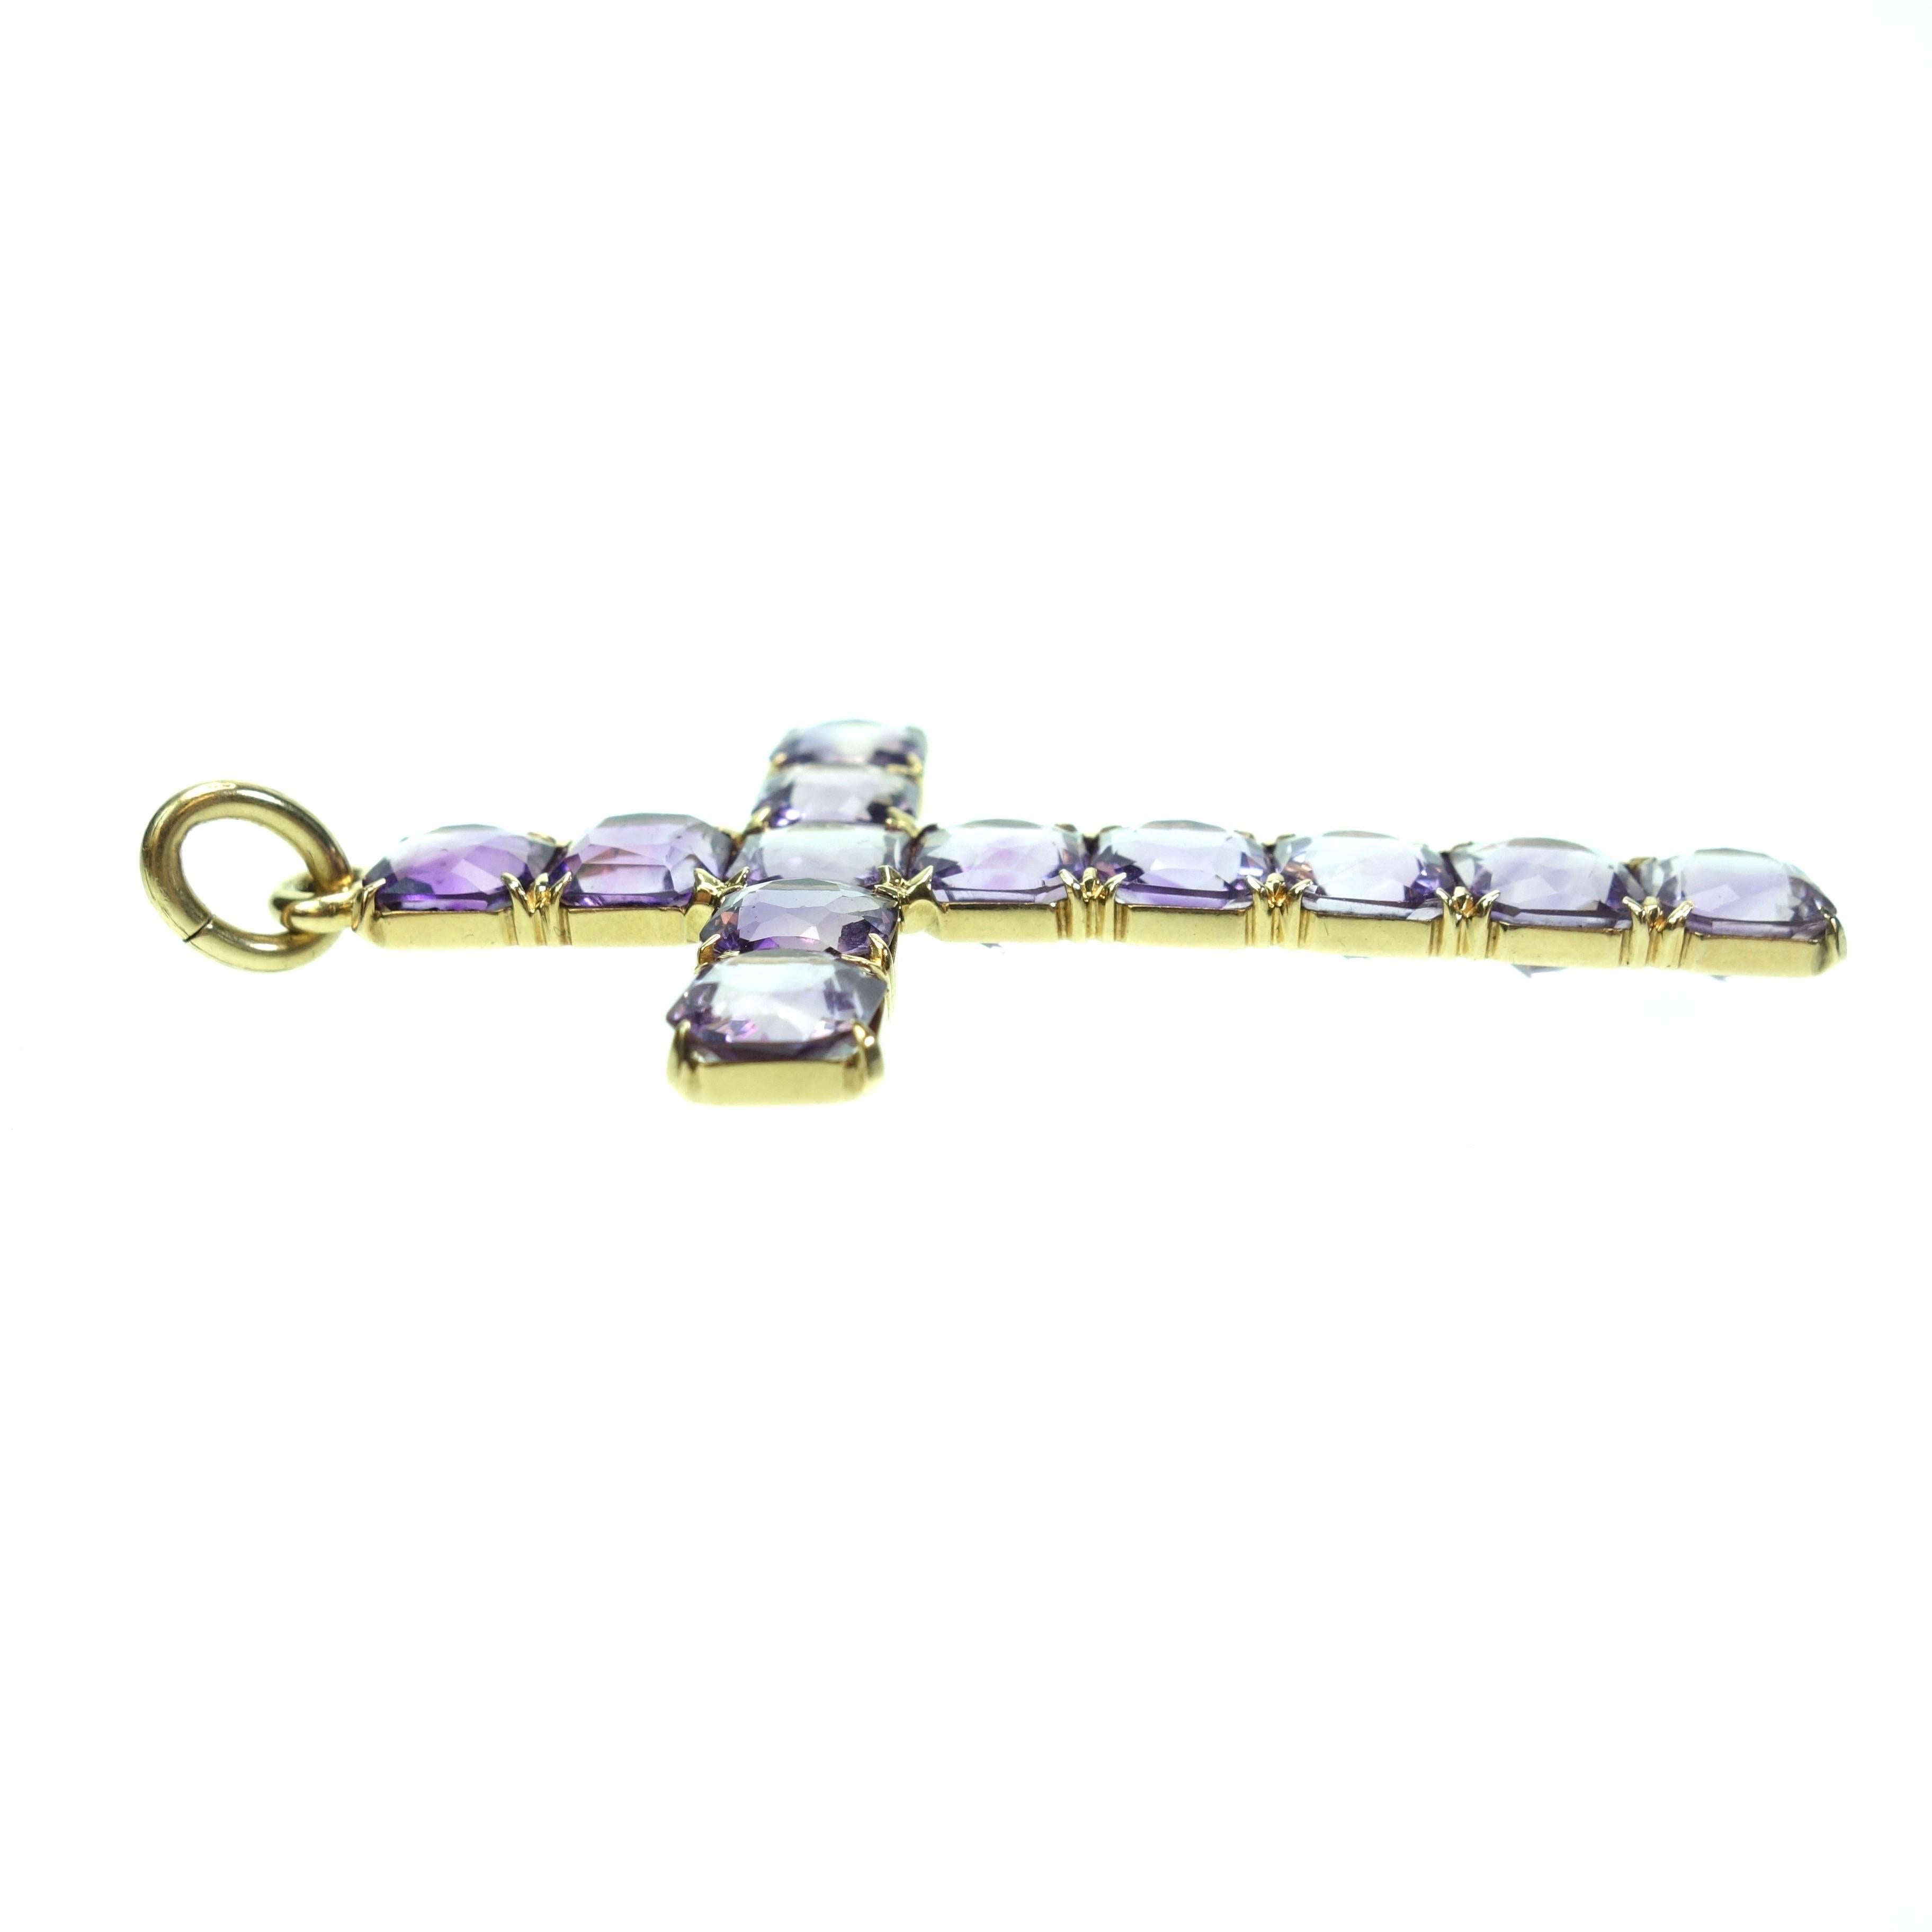 Amazing cross crafted in 14K yellow gold from the late 1890's.  The cross is set with 12 antique cushion cut purple amethyst stones. 

Measurements: 67 mm Hight x 35 mm Width
Weight: 8.8 grams
Marked: 14K and the Sloan & Co. makers mark